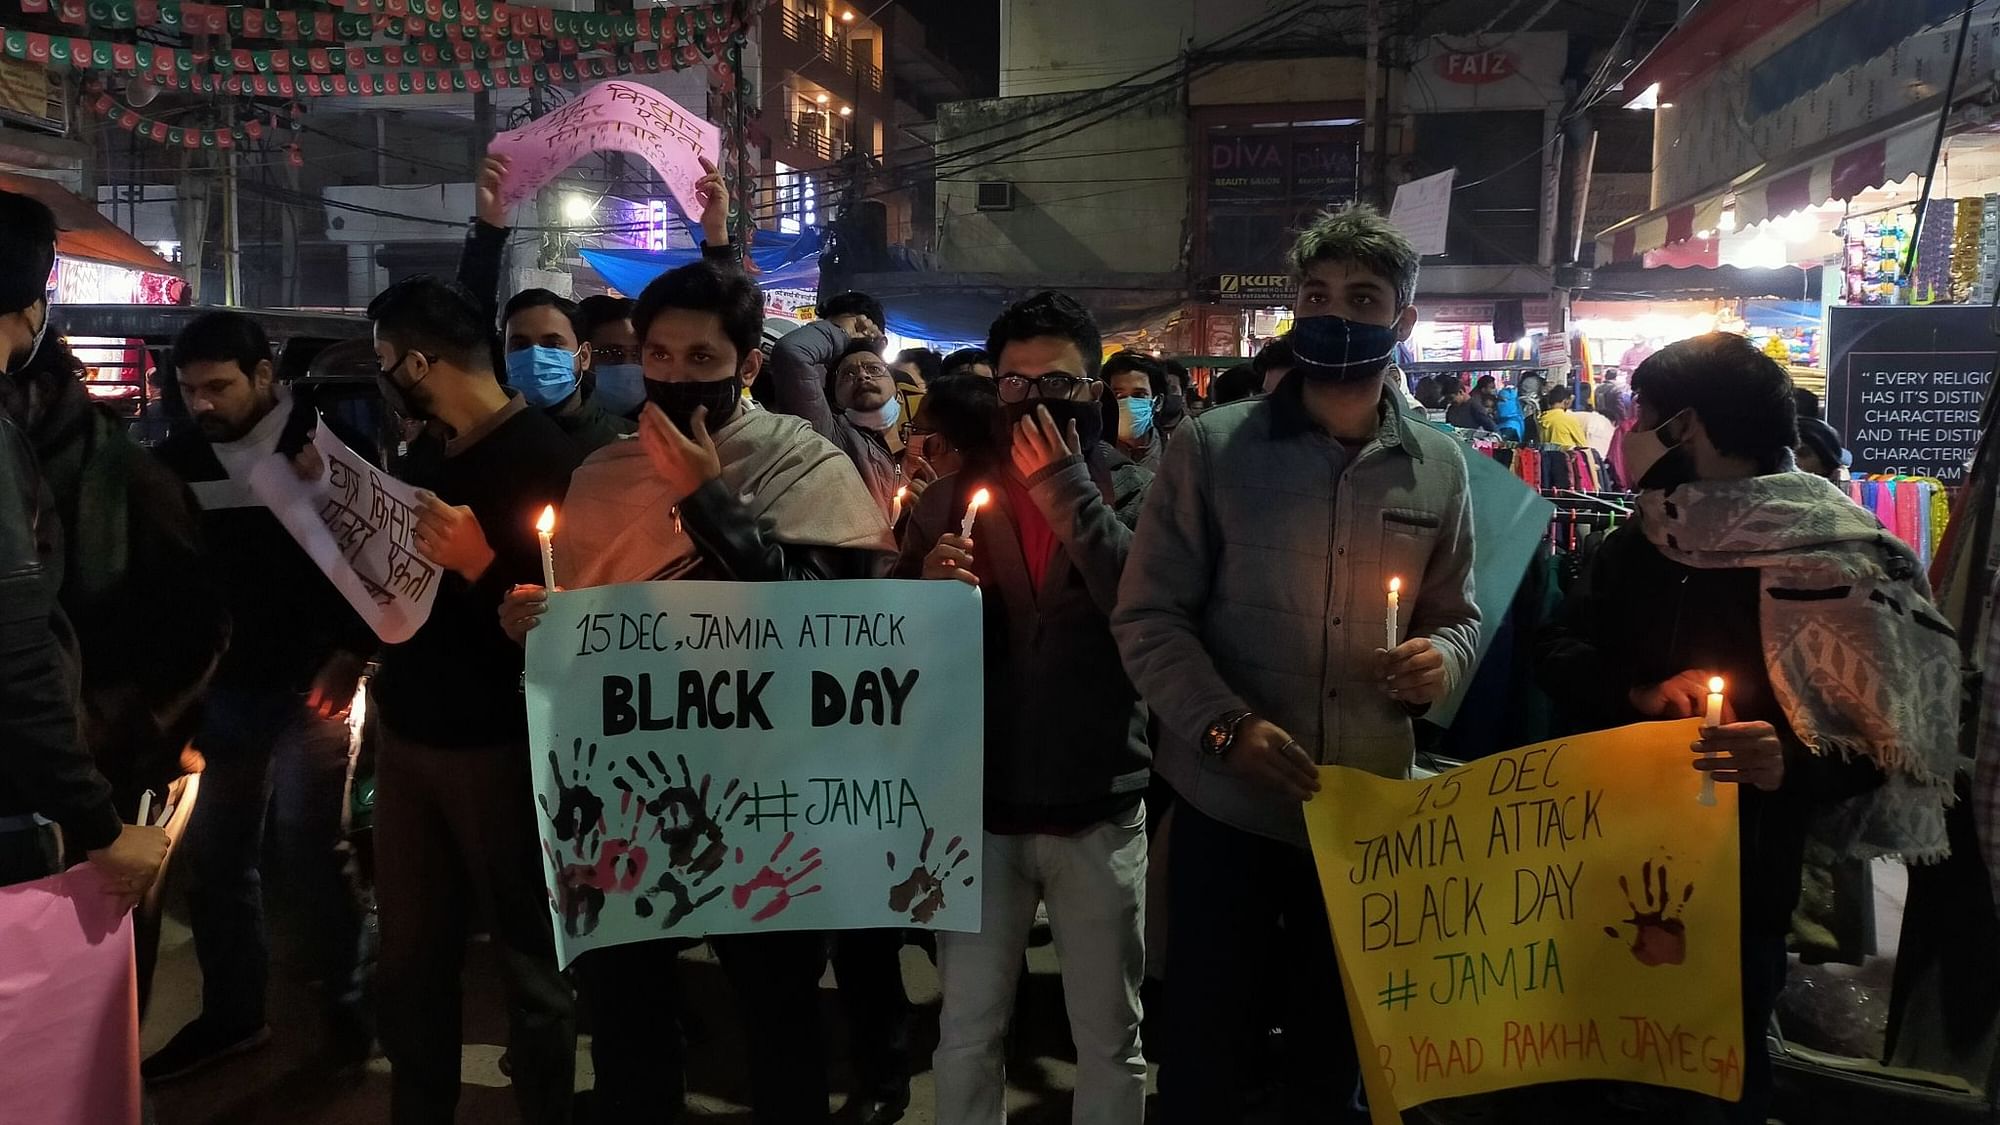 They were taking part in a candle march to mark one year of the violence in Jamia Millia Islamia. 